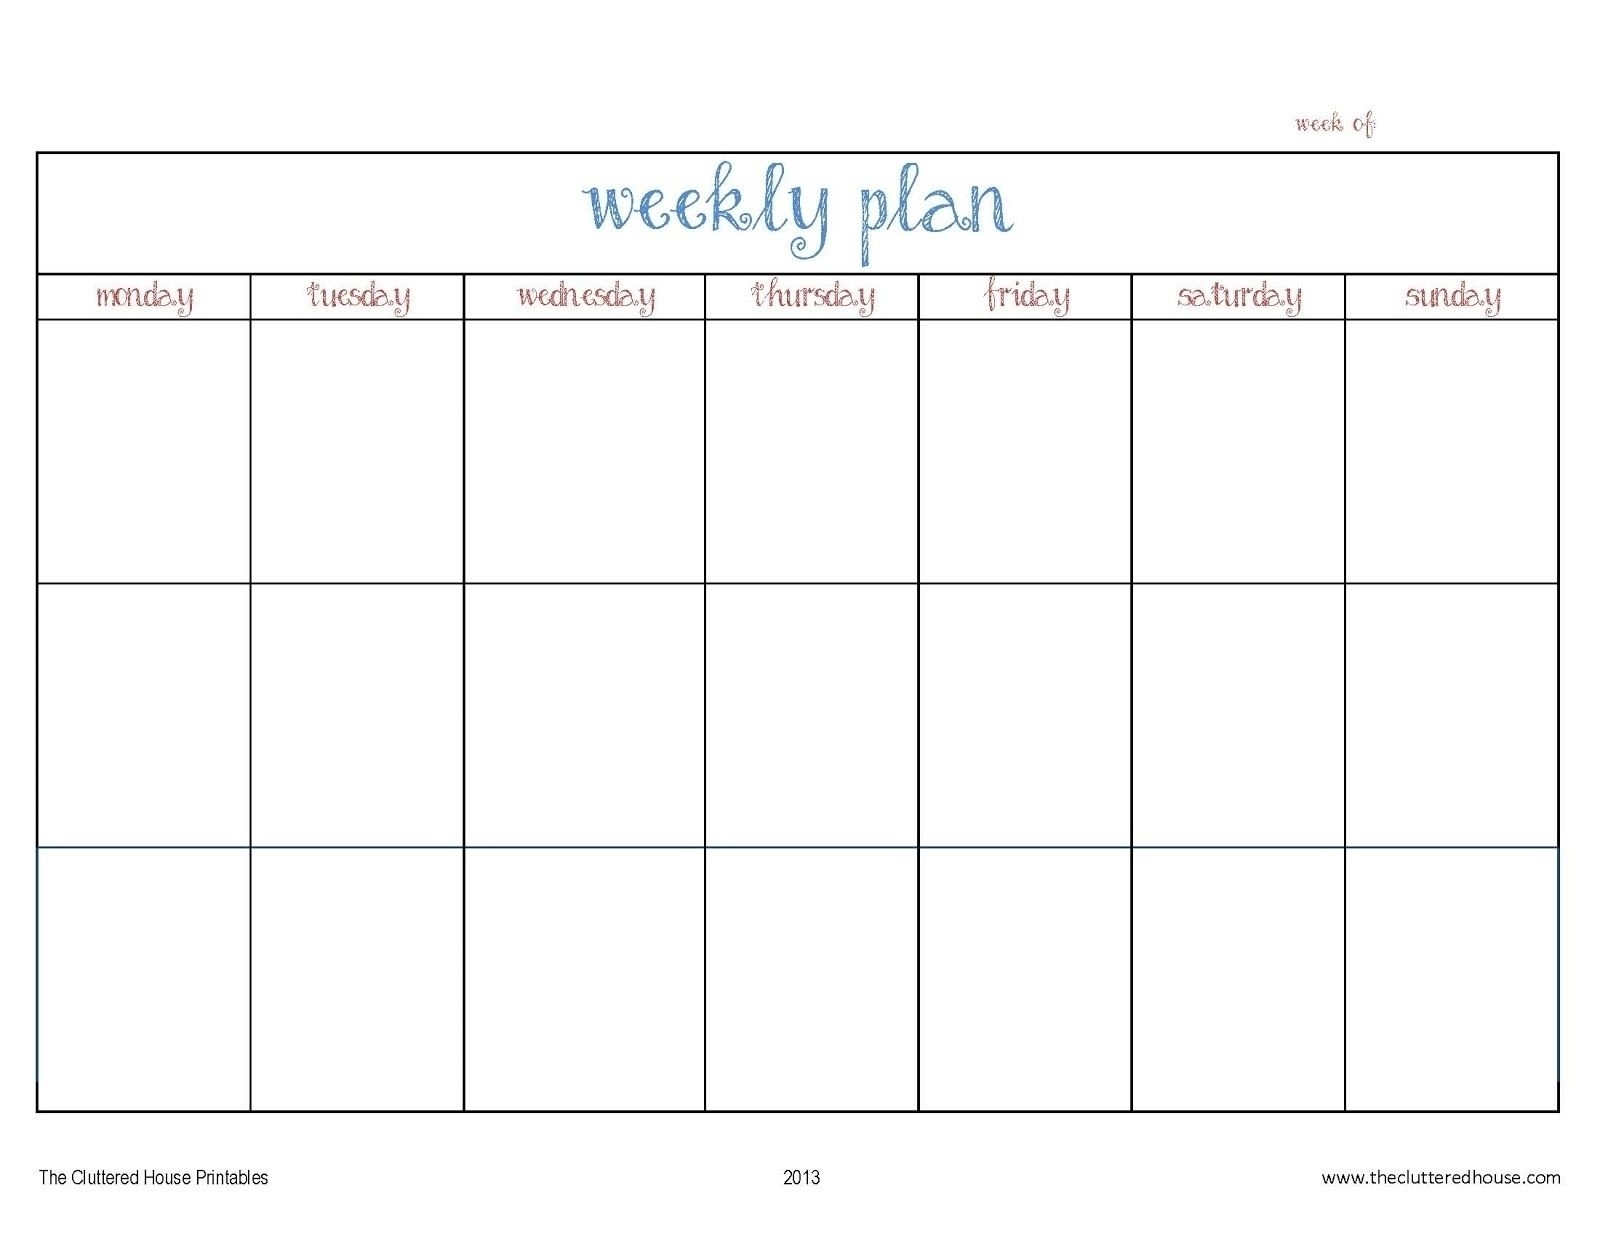 7 Day Weekly Planner Template Printable - Template